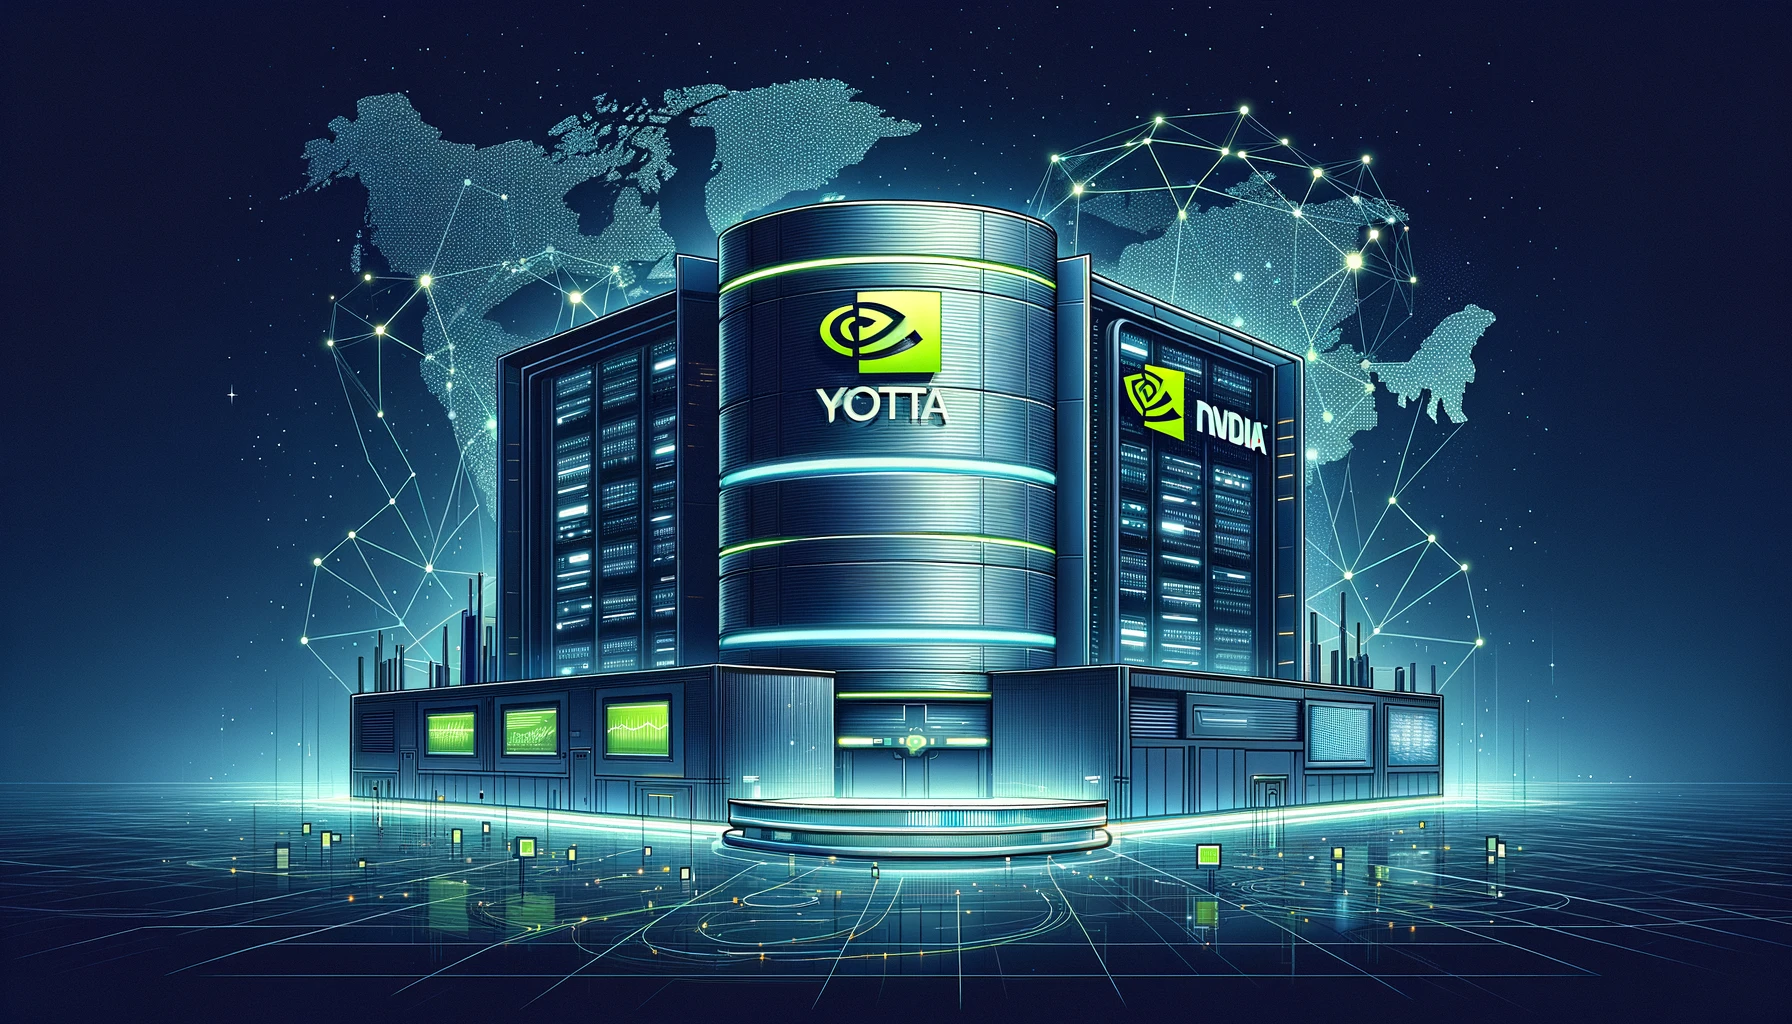 Yotta aims for AI data center leadership in India with Nvidia's support